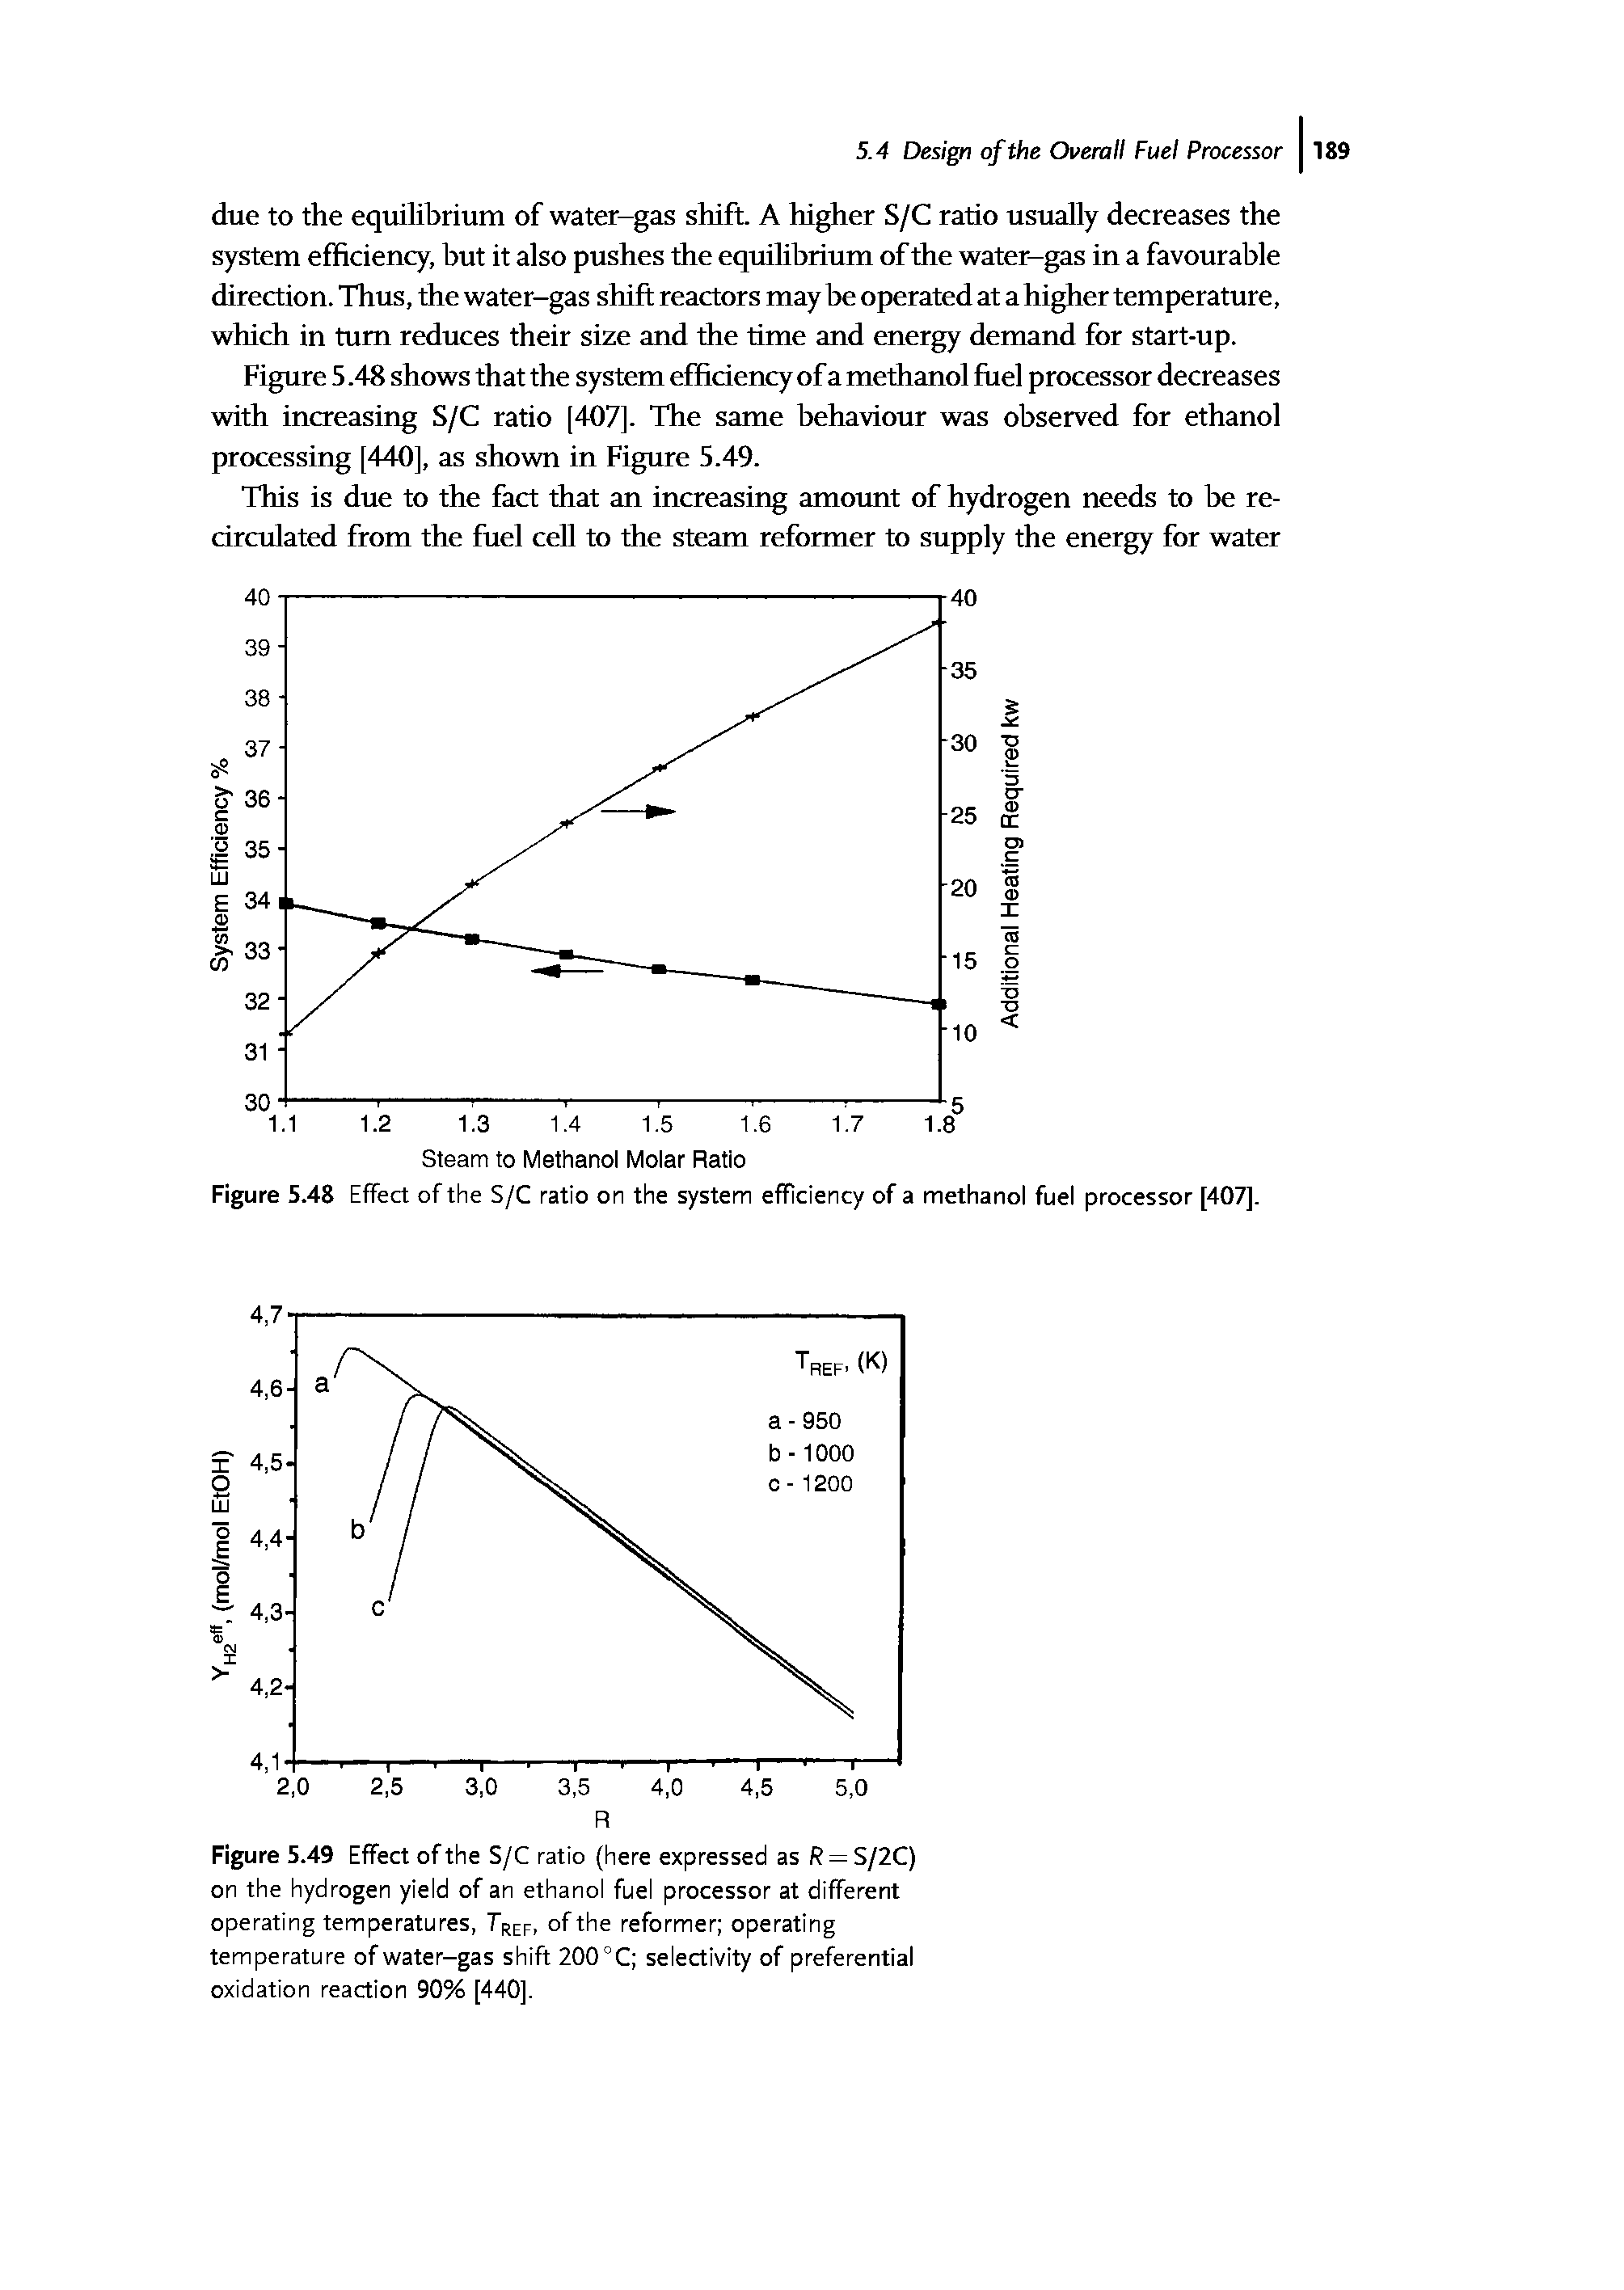 Figure 5.49 Effect of the S/C ratio (here expressed as R = S/2C) on the hydrogen yield of an ethanol fuel processor at different operating temperatures, Tref, of the reformer operating temperature of water-gas shift 200°C selectivity of preferential oxidation reaction 90% [440].